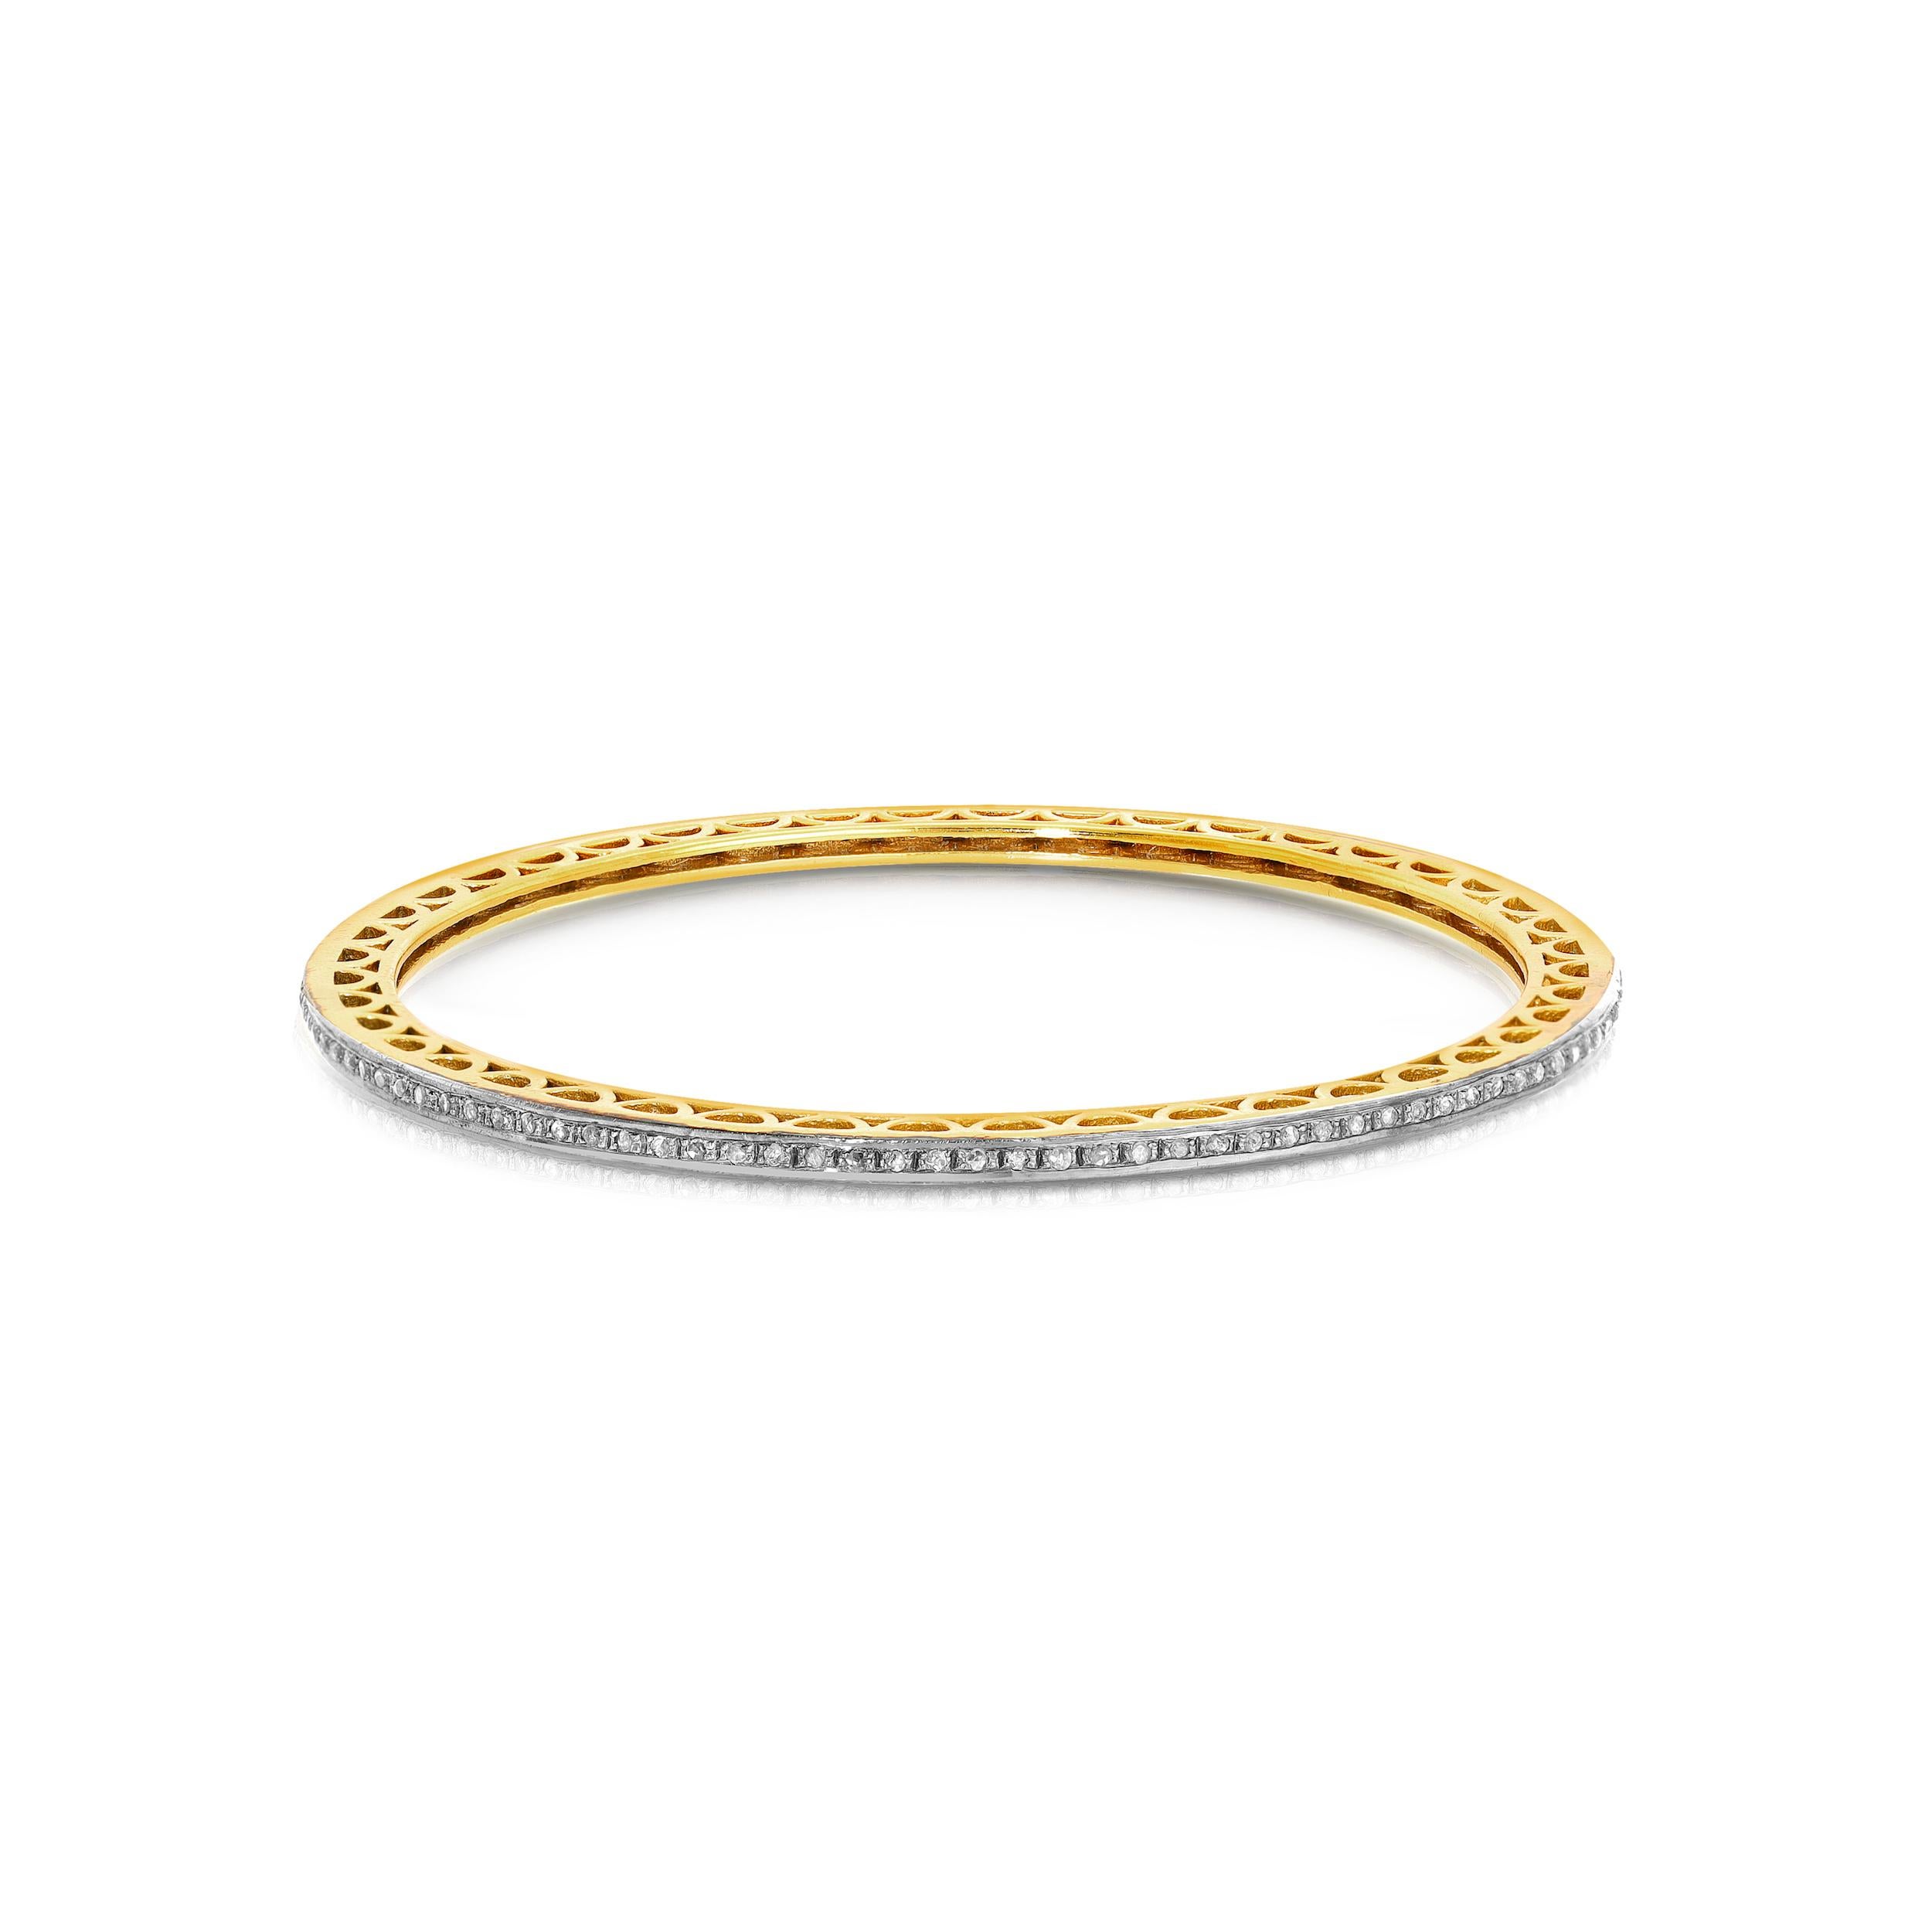 A fully set Diamond bangle featuring .80 Carats of White Diamonds set in Blackened Silver on contemporary bangle of 18 Karat Gold overlay Silver... The ultimate in chic, stylish glamour alone or a perfect contrasting accompaniment to stacks of